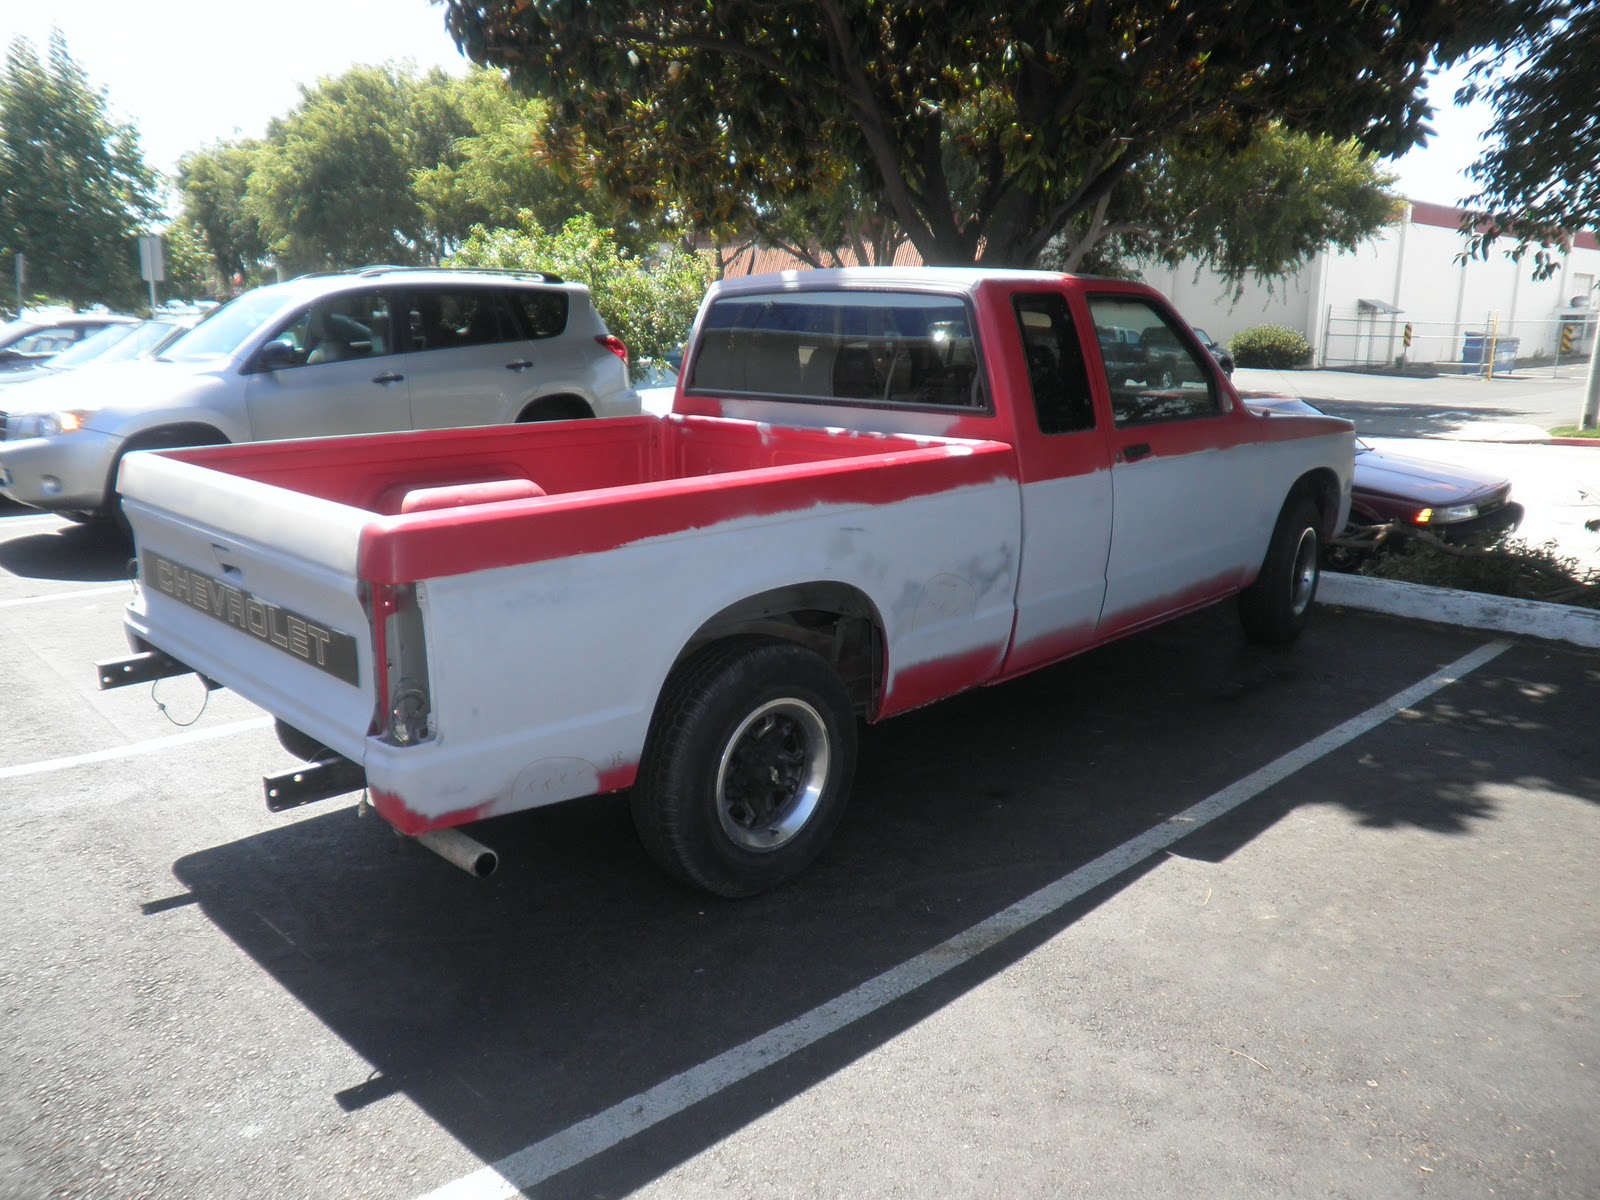 car of the day is a 1991 Chevrolet pick-up truck that came in for a 2-tone paint...